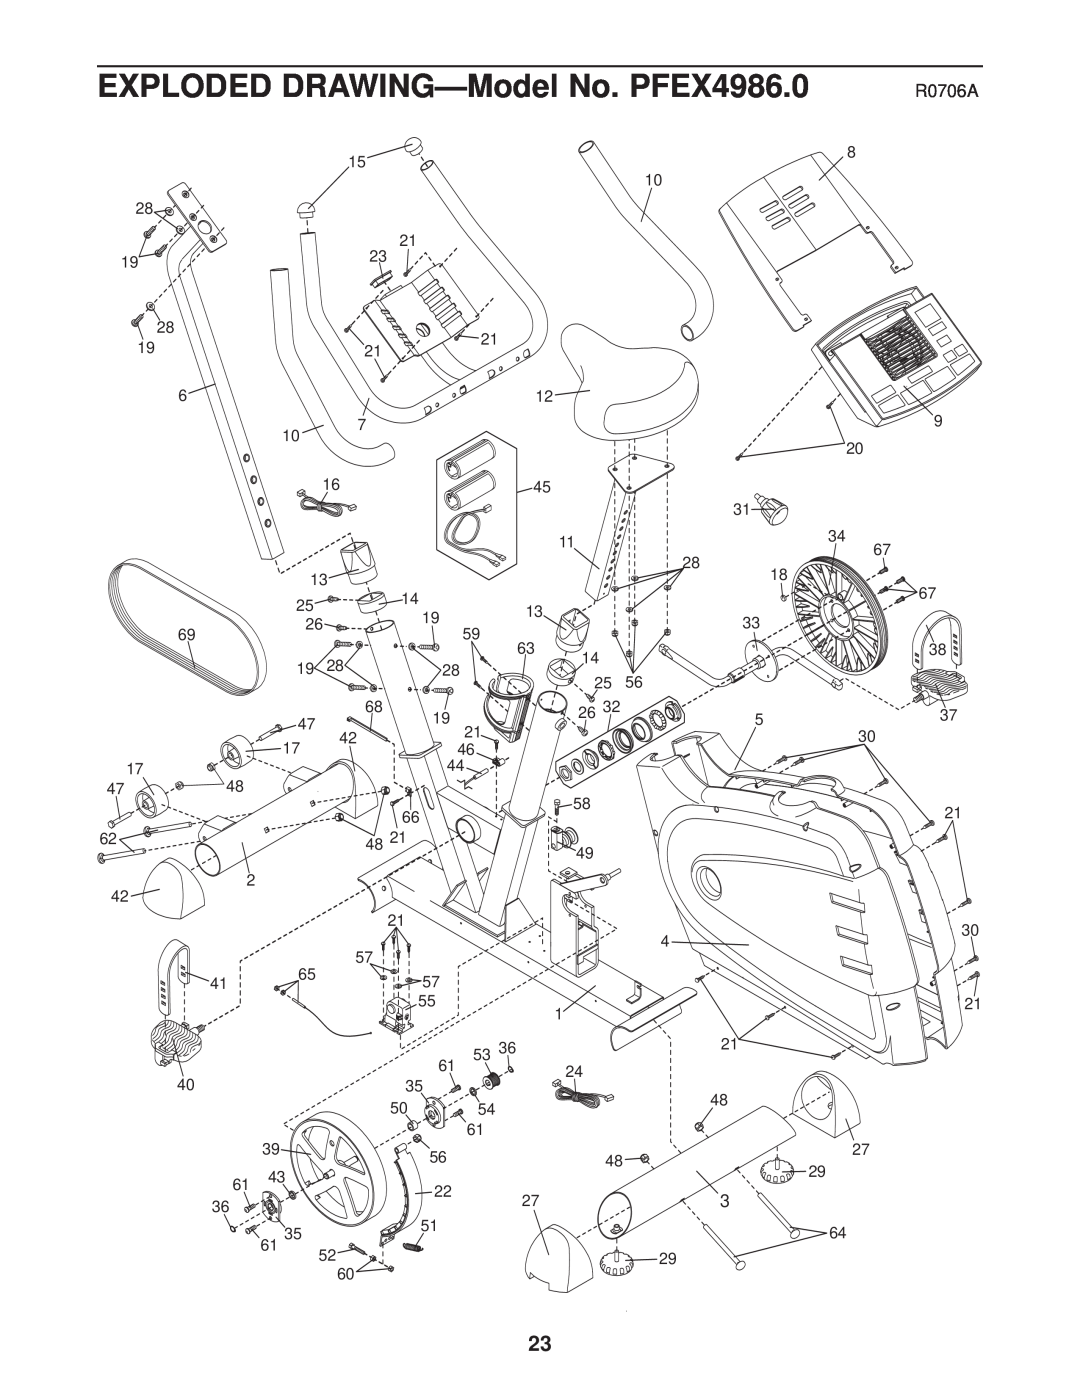 ProForm user manual EXPLODED DRAWING-Model No. PFEX4986.0, R0706A 